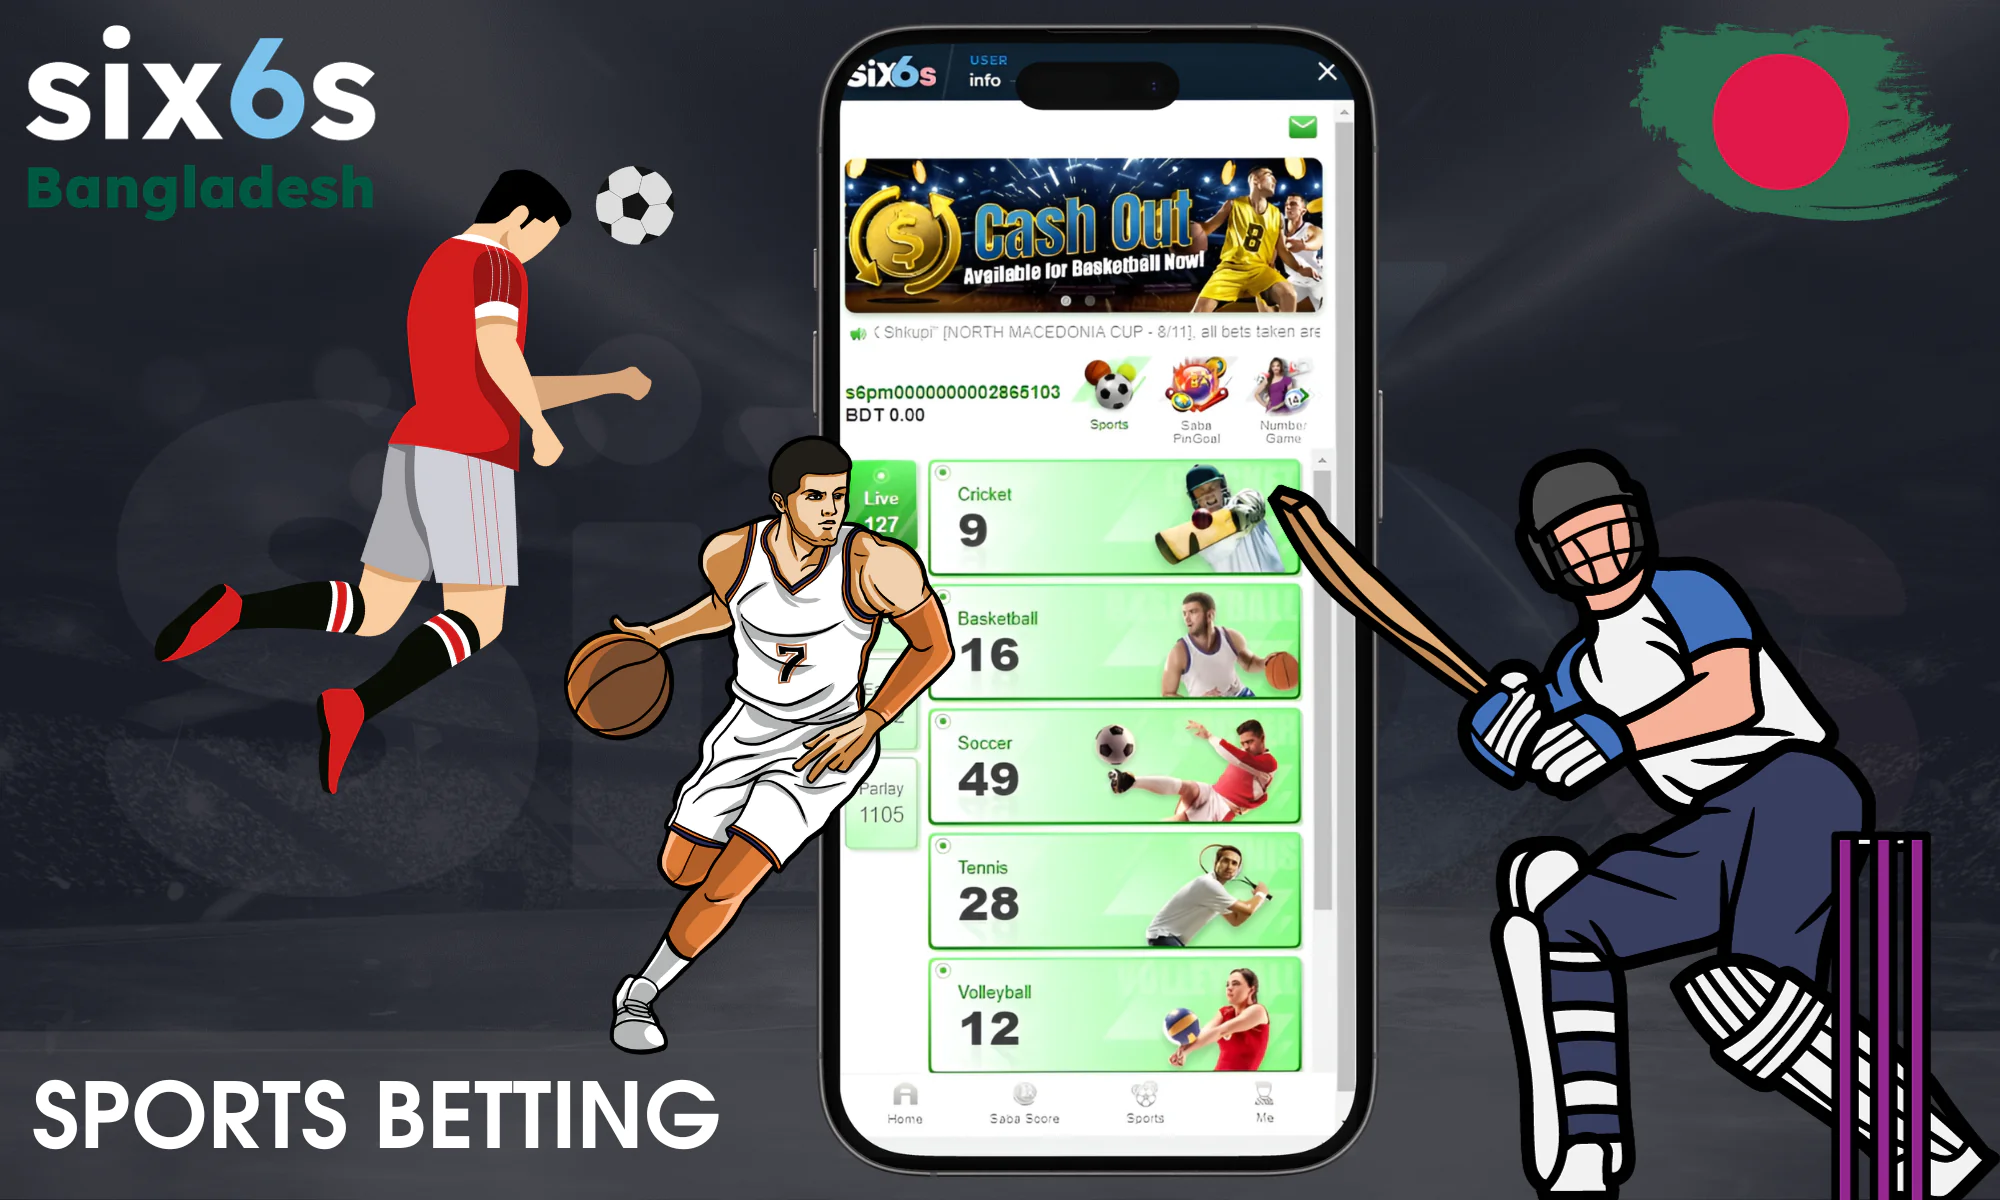 More than 20 sports disciplines are available for players from Bangladesh to bet on at Six6s